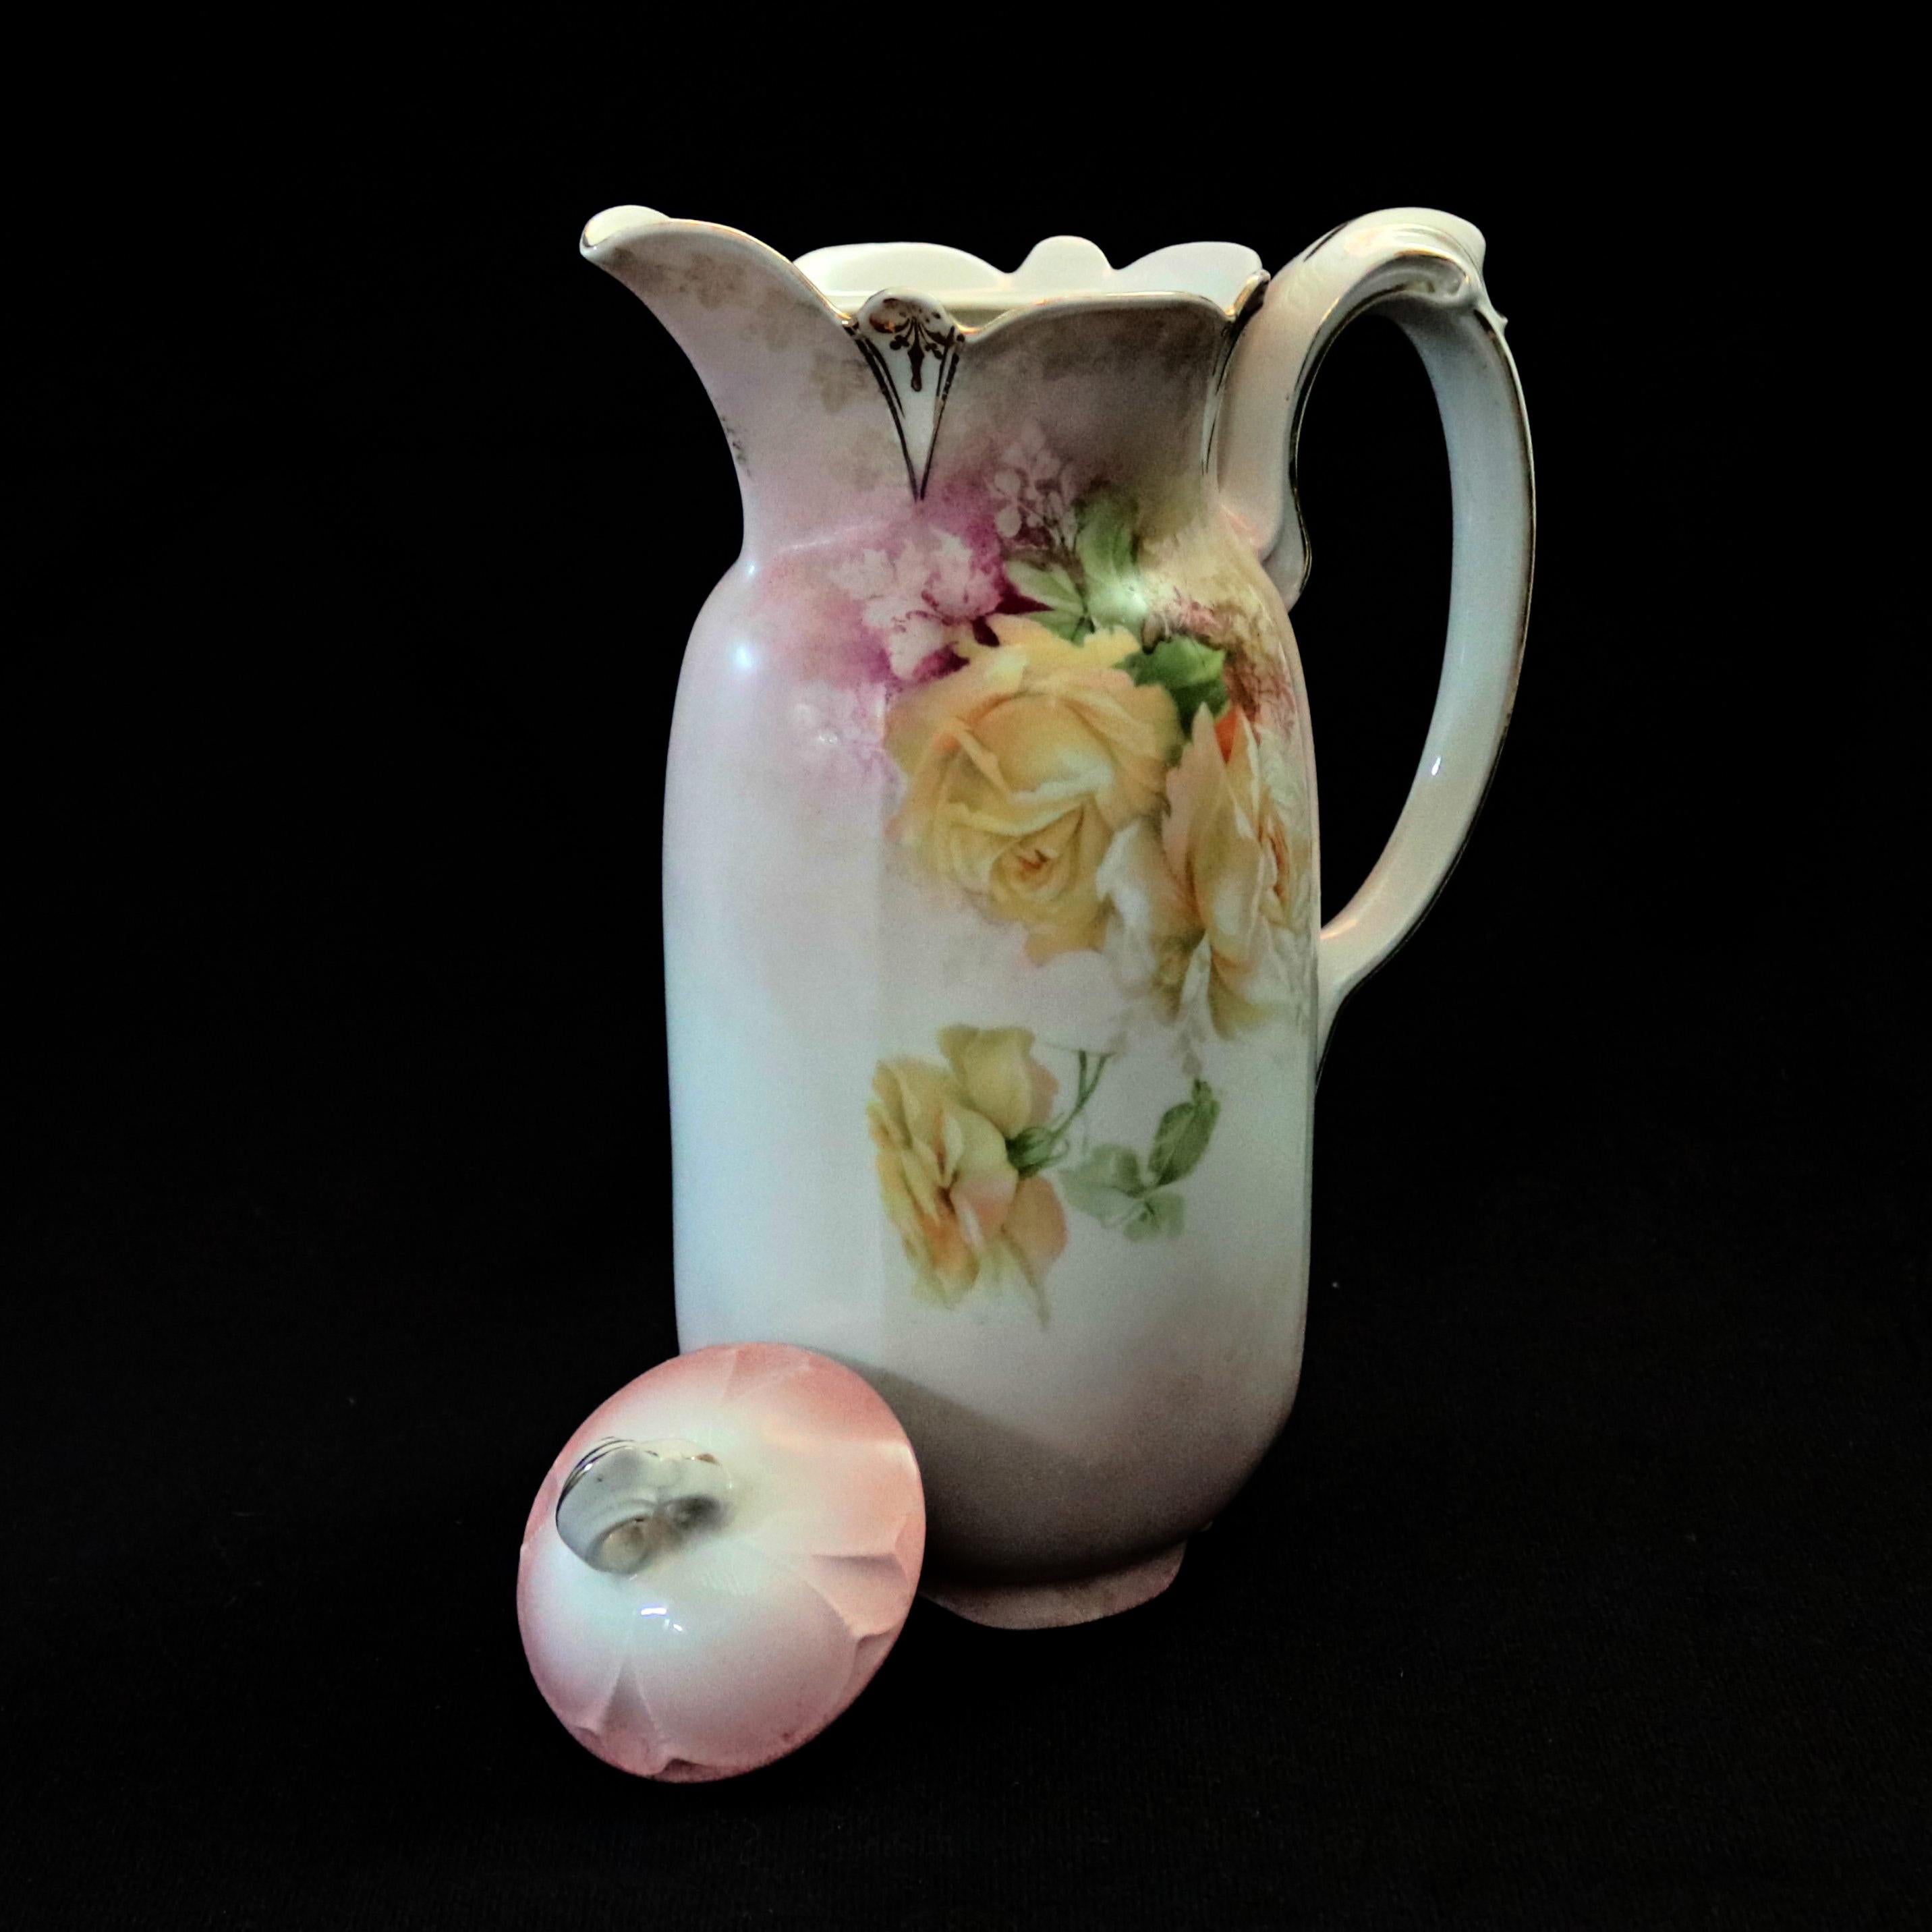 An antique hand painted R. S. Prussia porcelain pitcher offers scalloped lip with lid surmounting faceted vessel with yellow roses, RS Prussia stamp on base as photographed, circa 1920.

***DELIVERY NOTICE – Due to COVID-19 we are employing